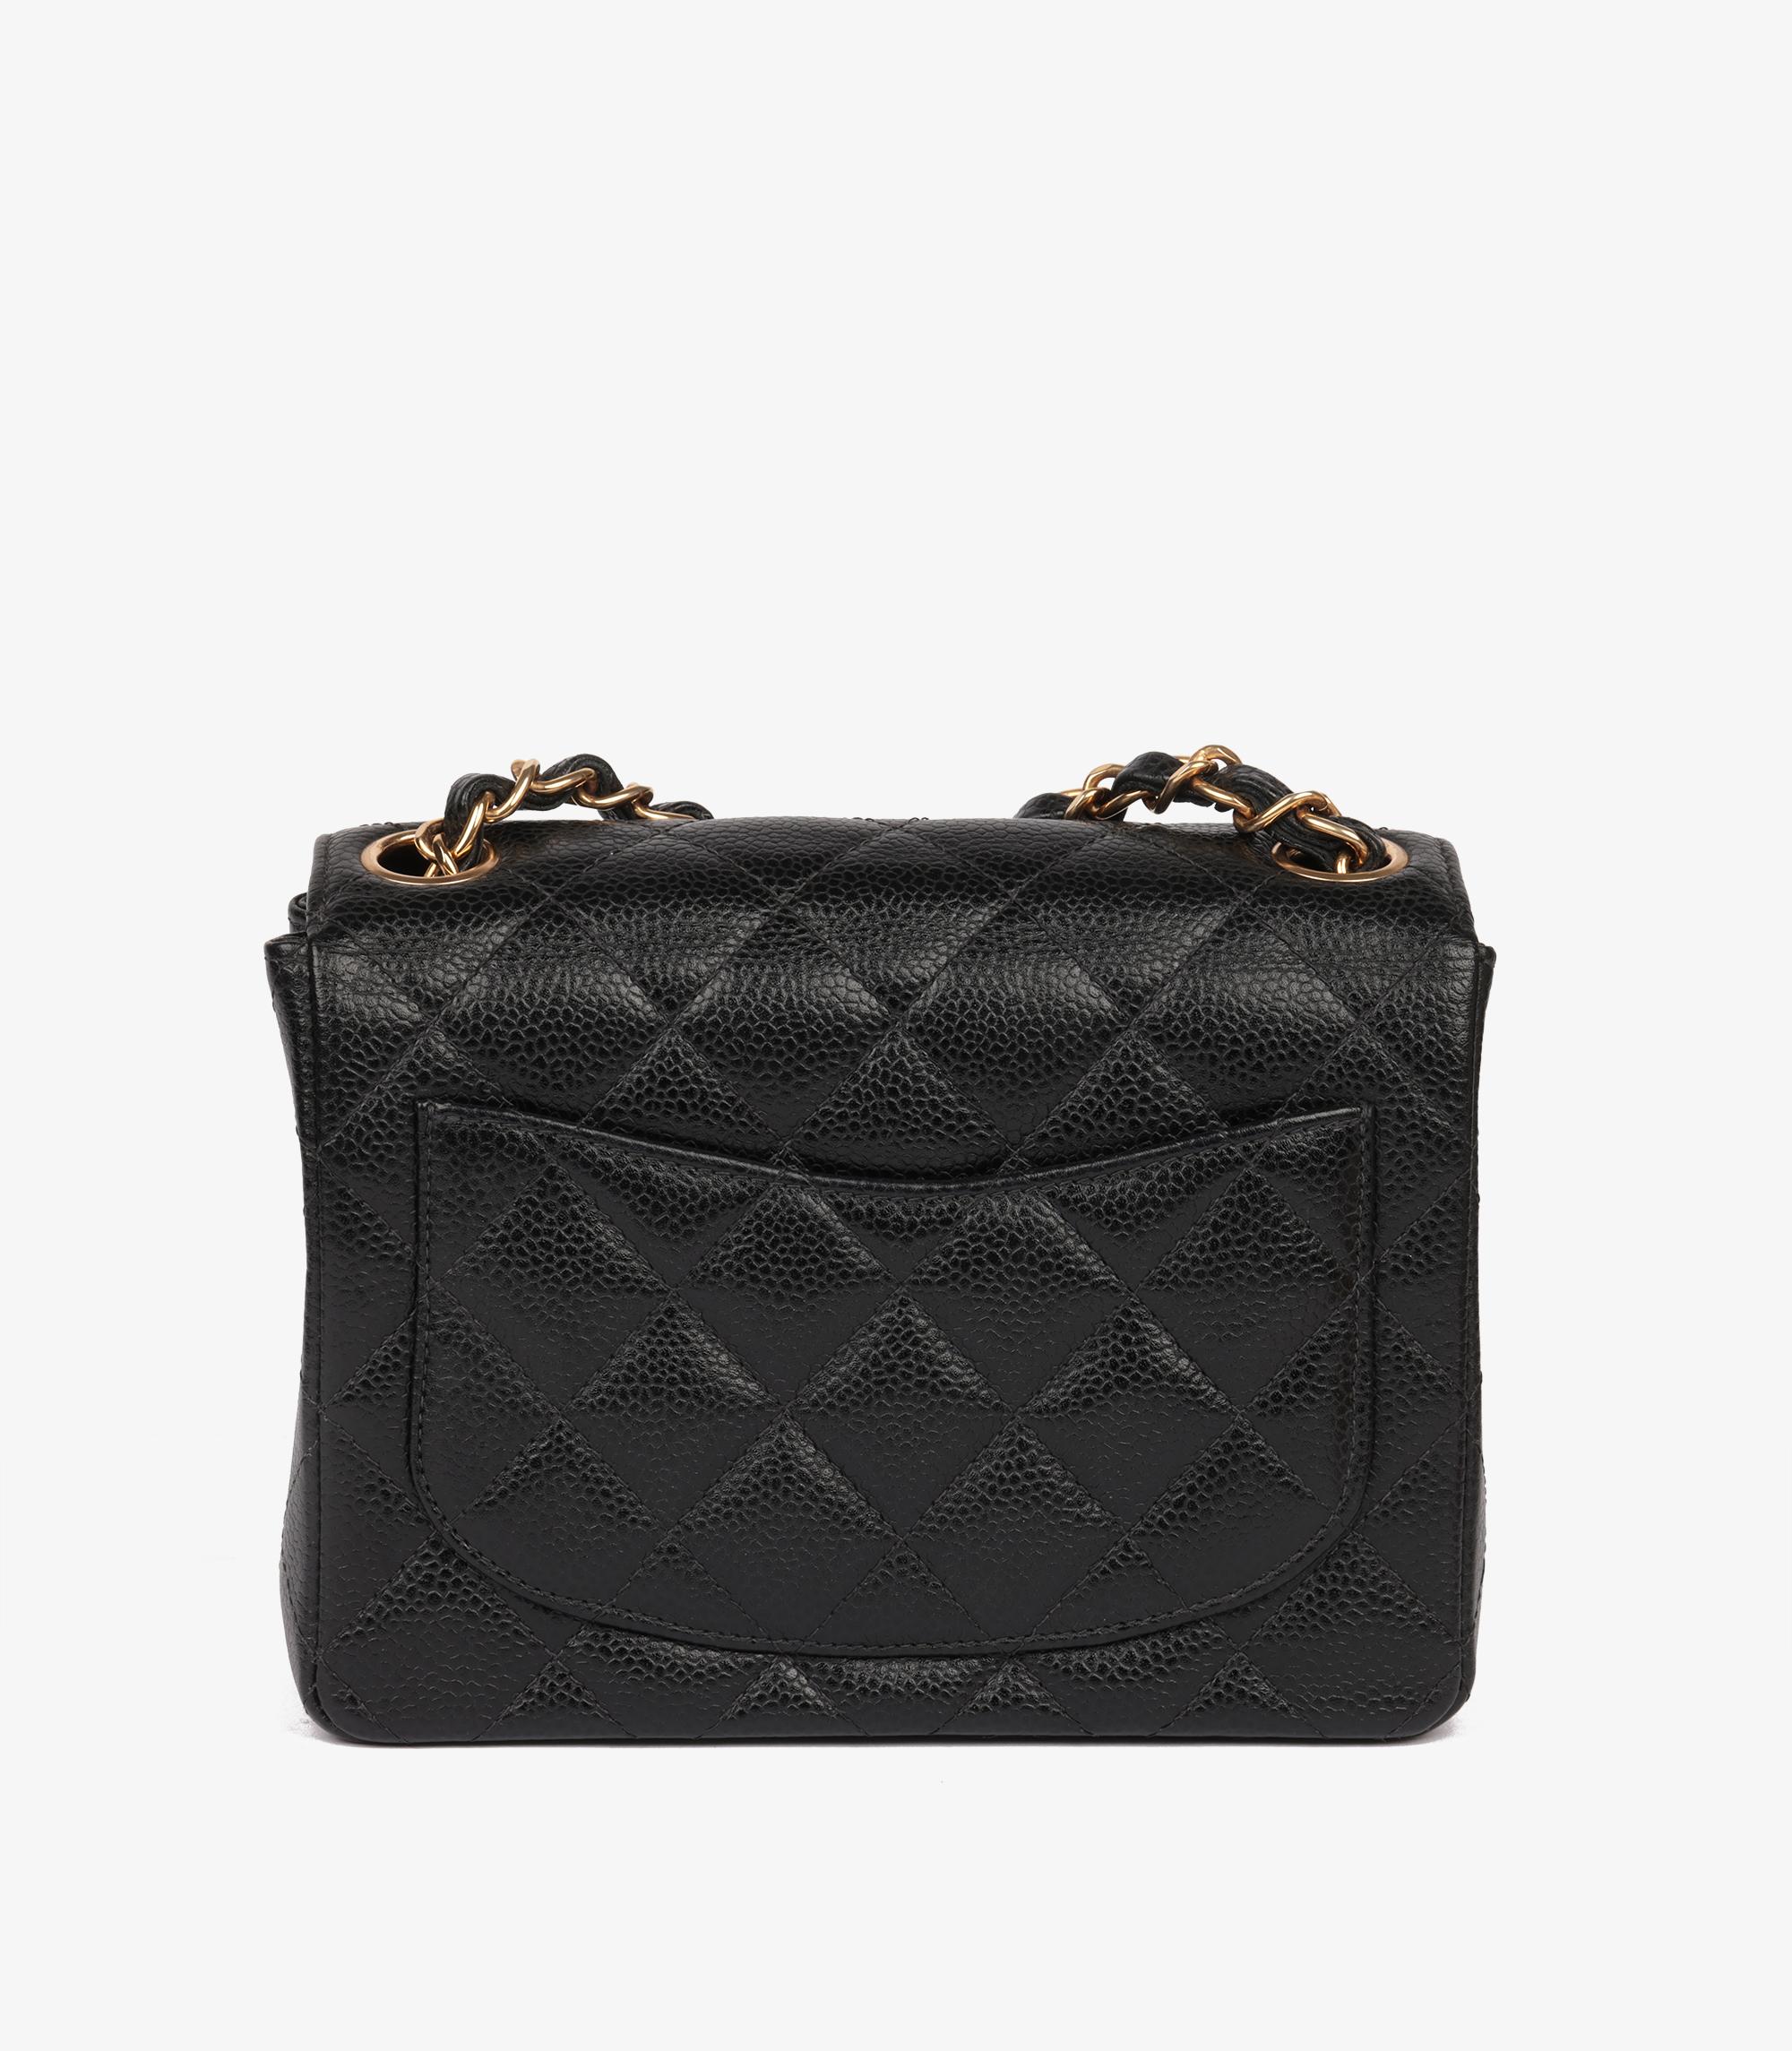 Women's Chanel Black Quilted Caviar Leather Vintage Square Mini Flap Bag